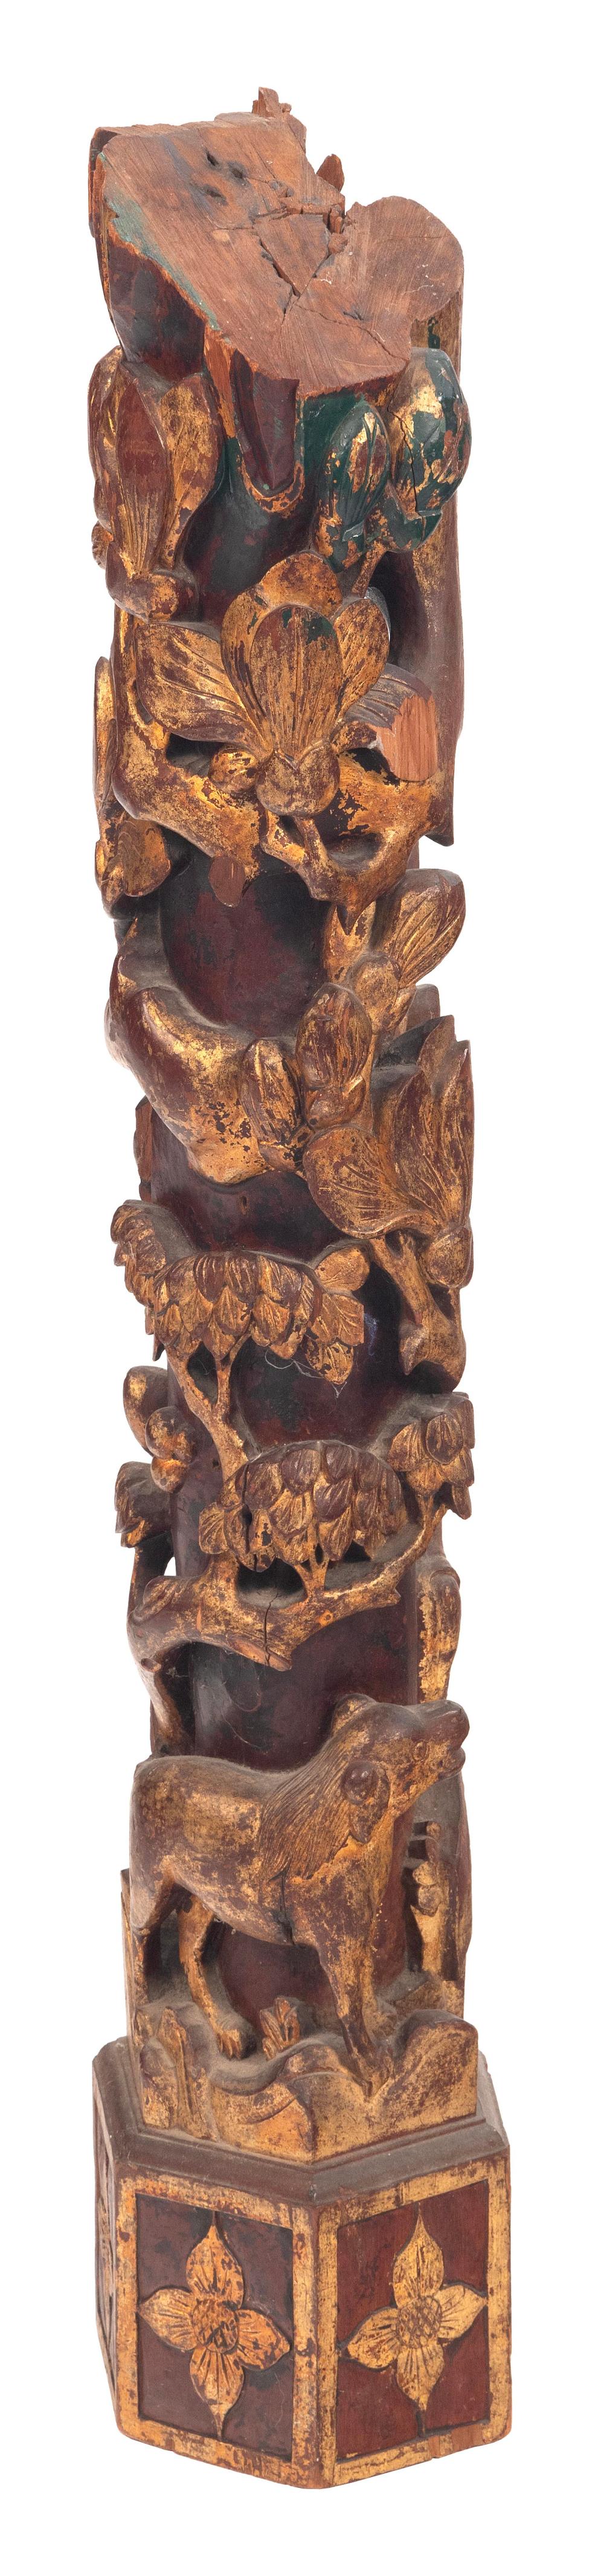 CARVED WOOD ARCHITECTURAL PILLAR 3c7d62